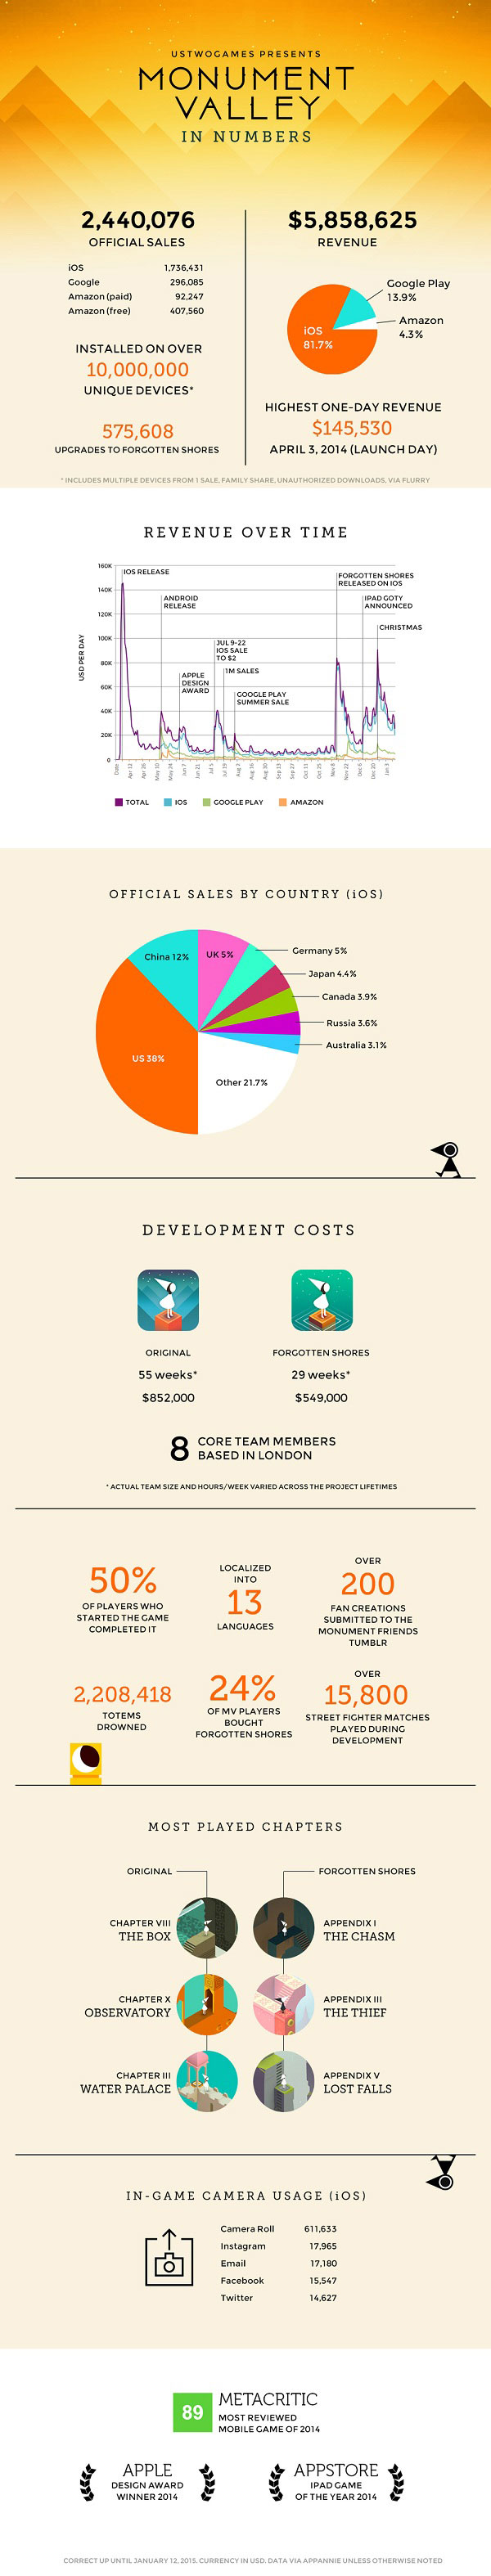 monument-valley-infographic